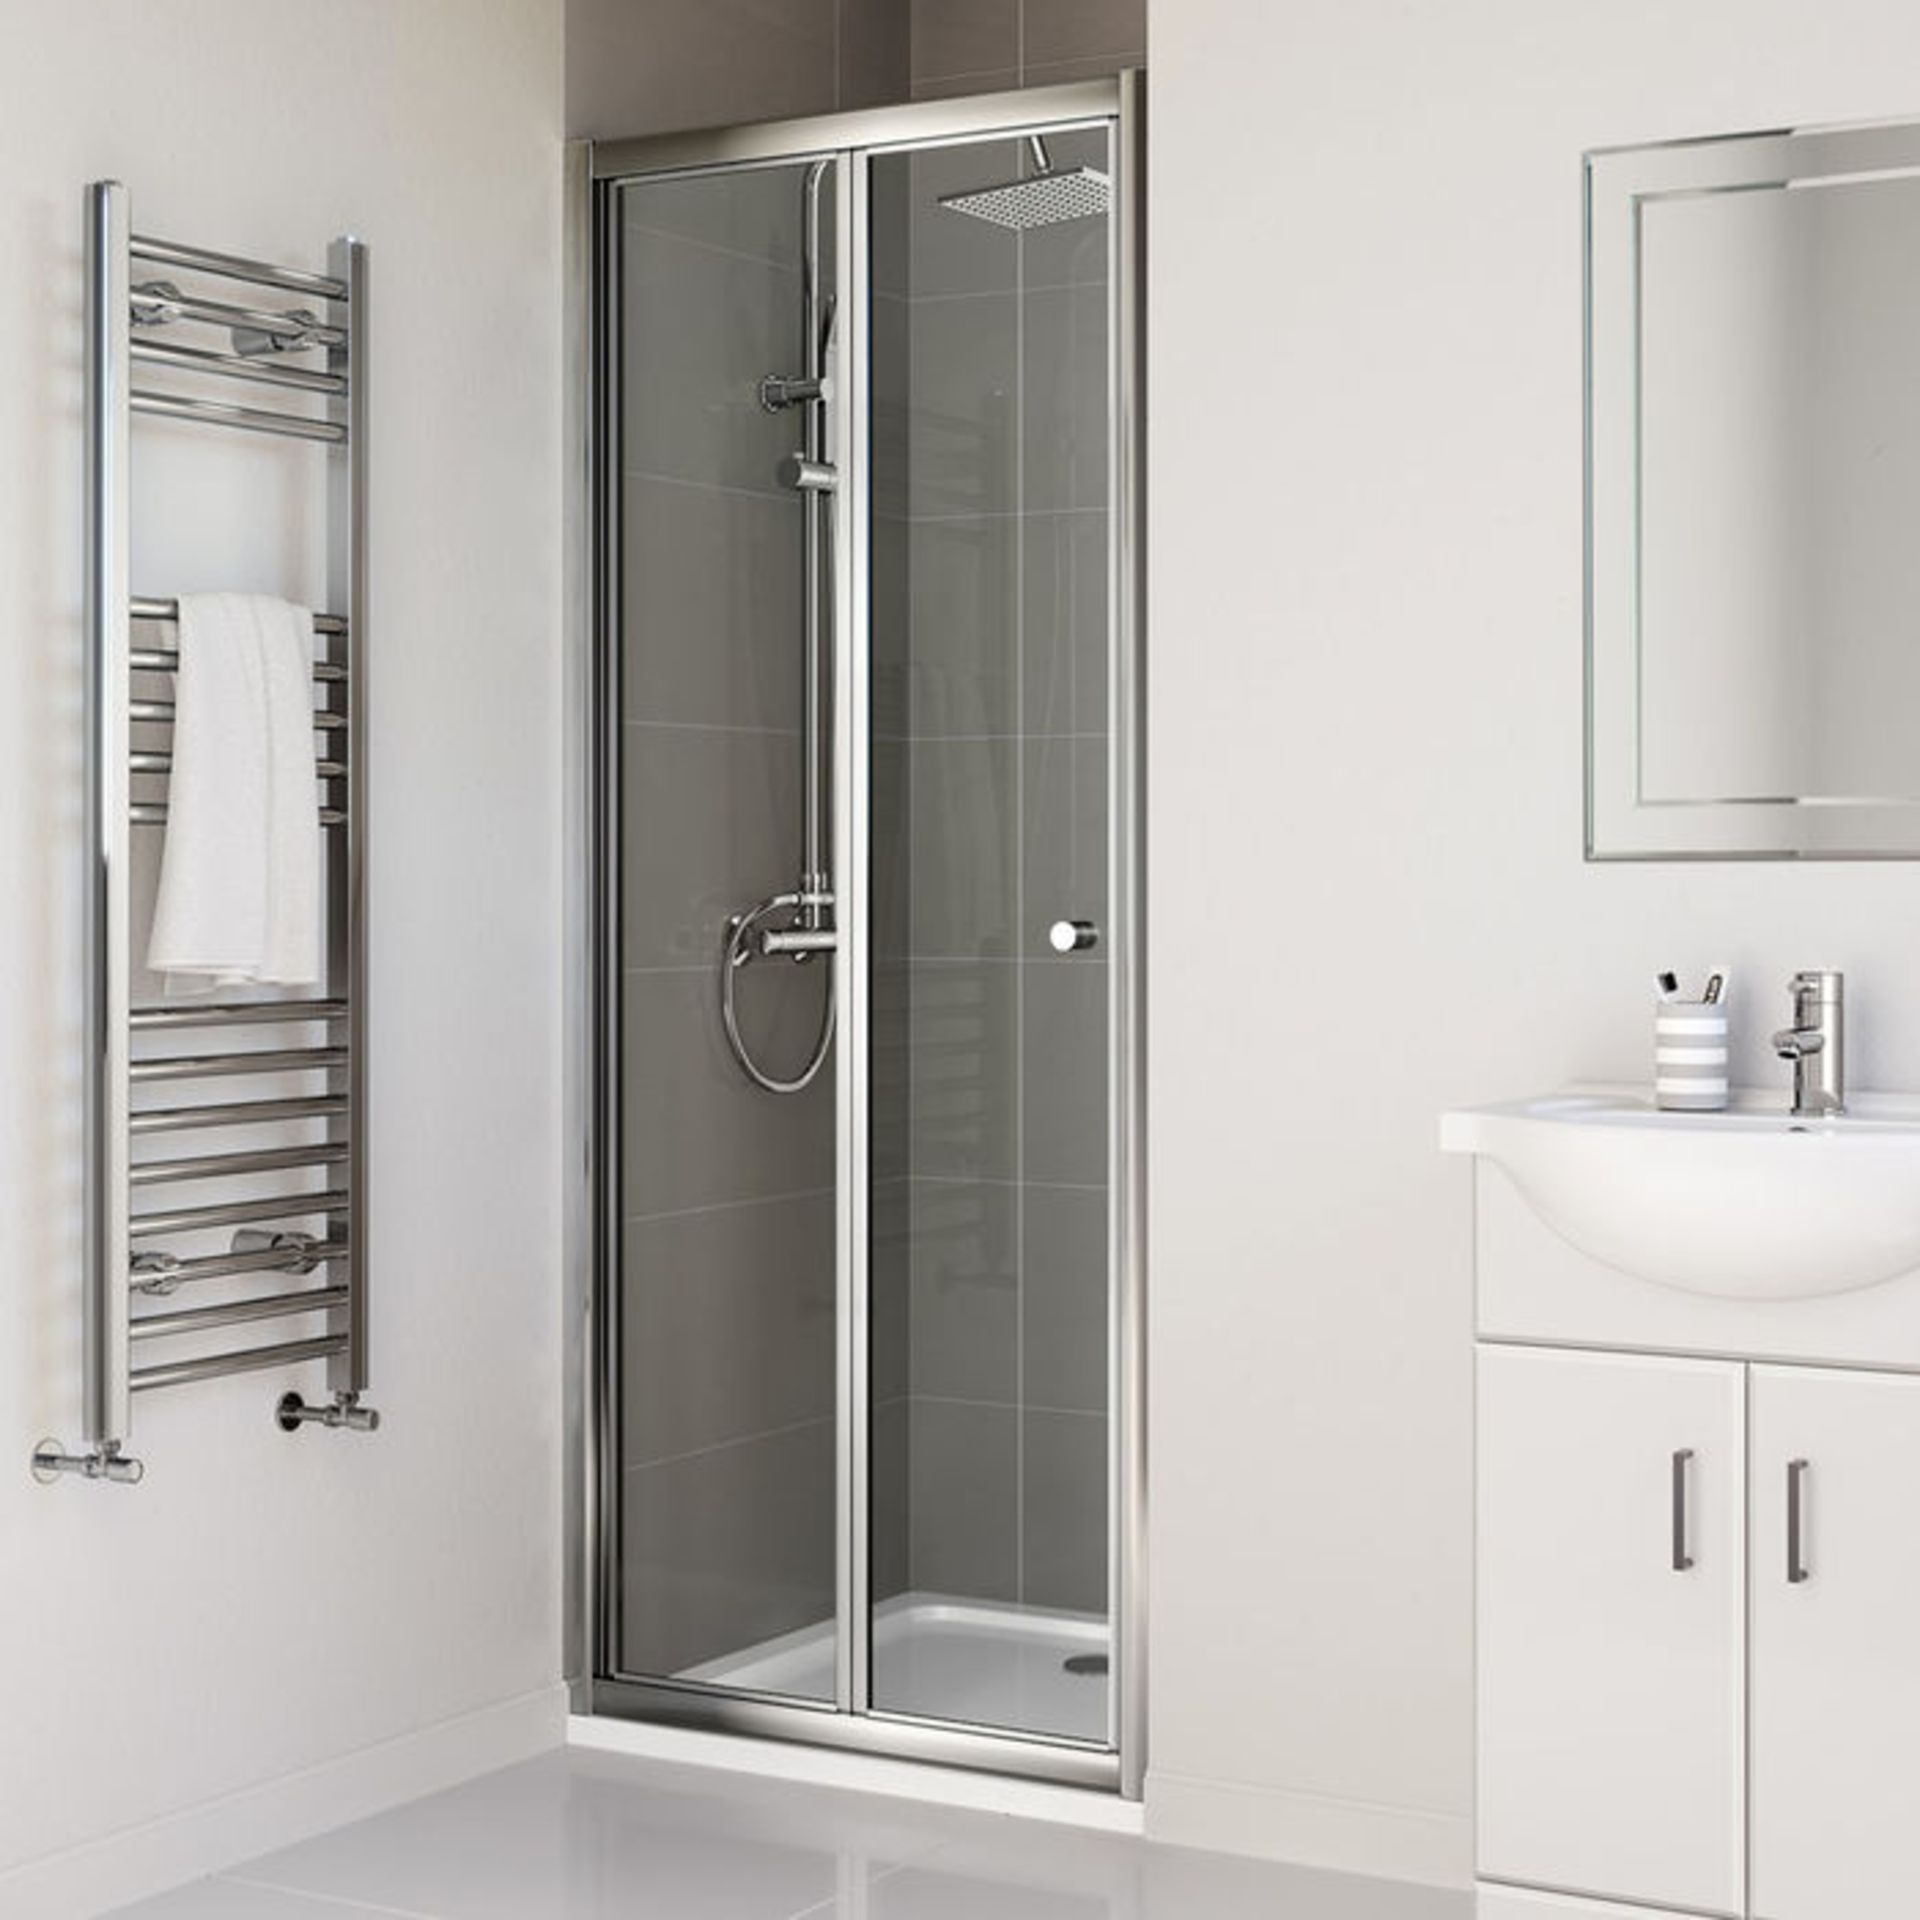 (PO13) 760mm - Elements Bi Fold Shower Door. RRP £299.99.4mm Safety GlassFully waterproof tested